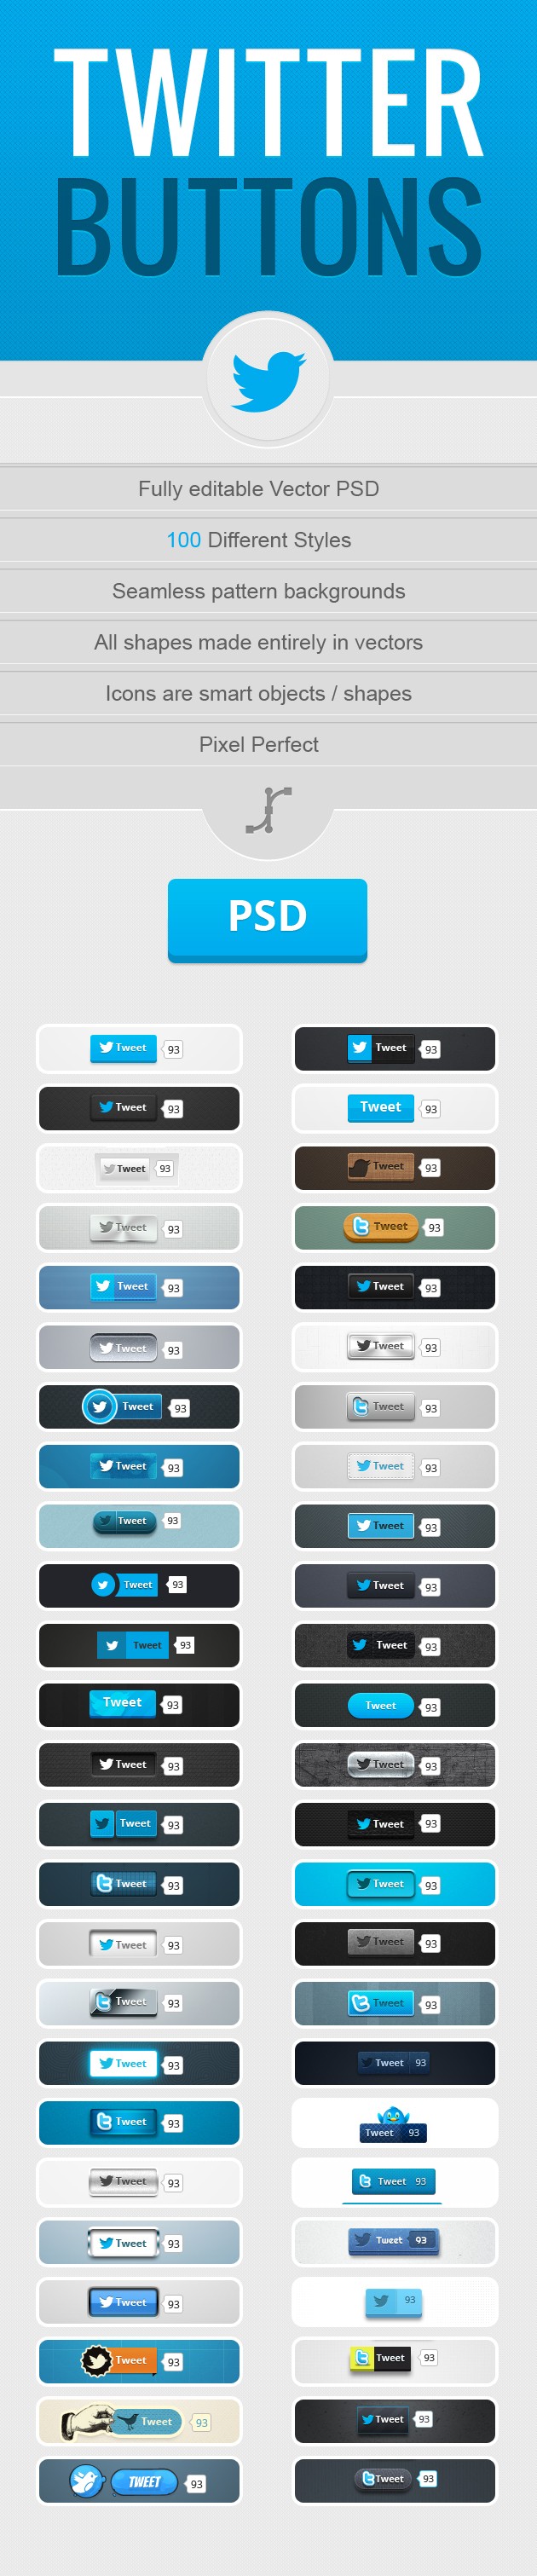 INTRO-Twitter-Buttons